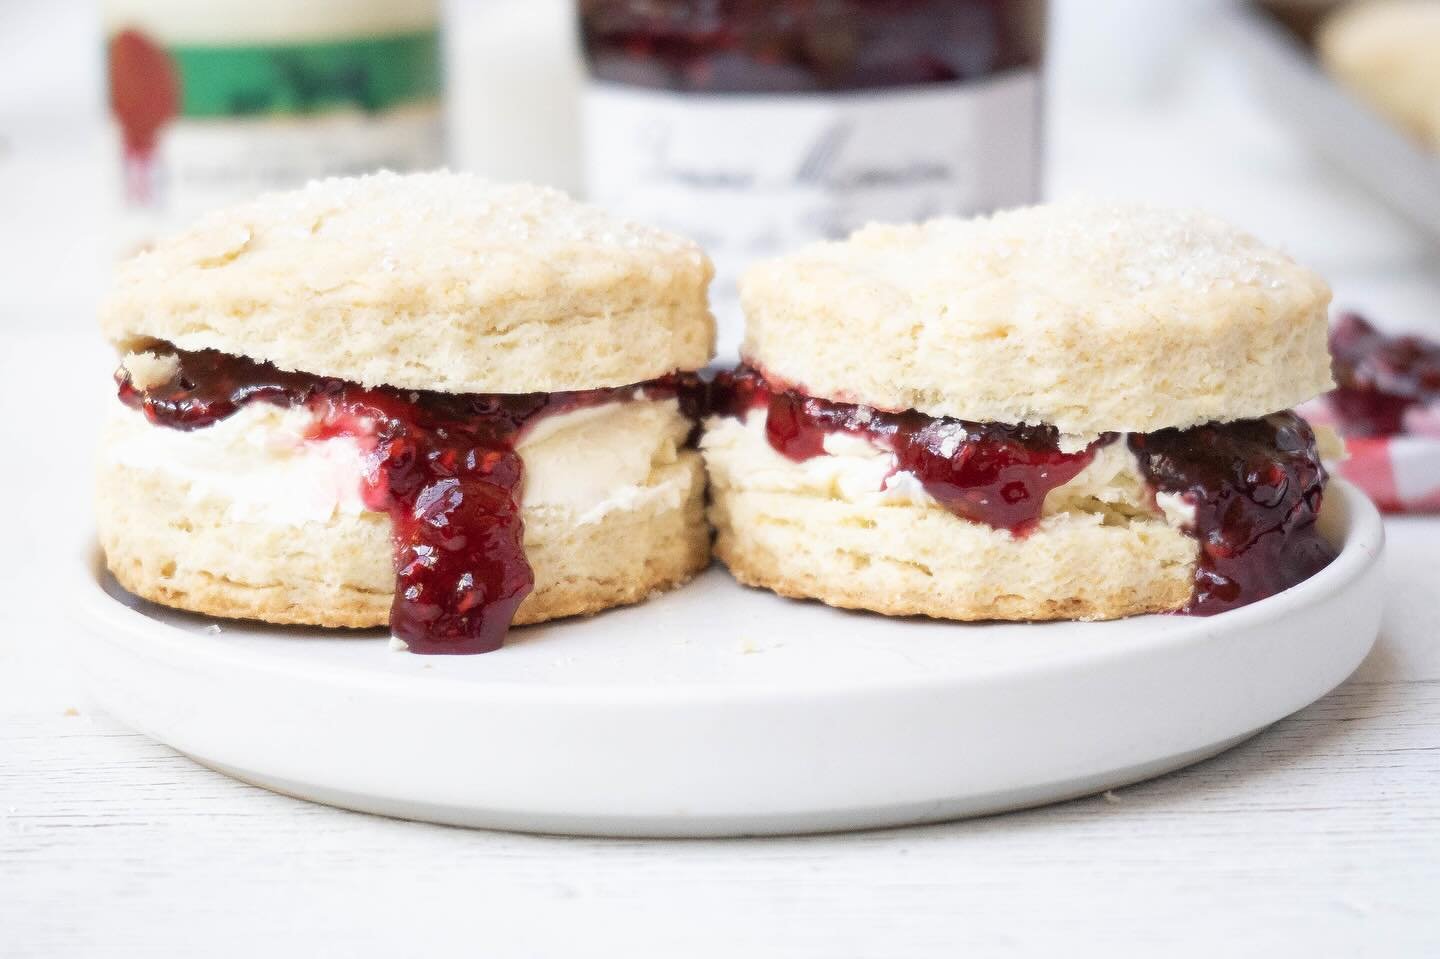 Cream tea scones - tender scones glittery with coarse sanding sugar, slathered with thick clotted cream and lashings of jam. Perfect for mothers day, afternoon tea parties or any old afternoon tea that needs a lift. 

Link in bio or here www.theverdi